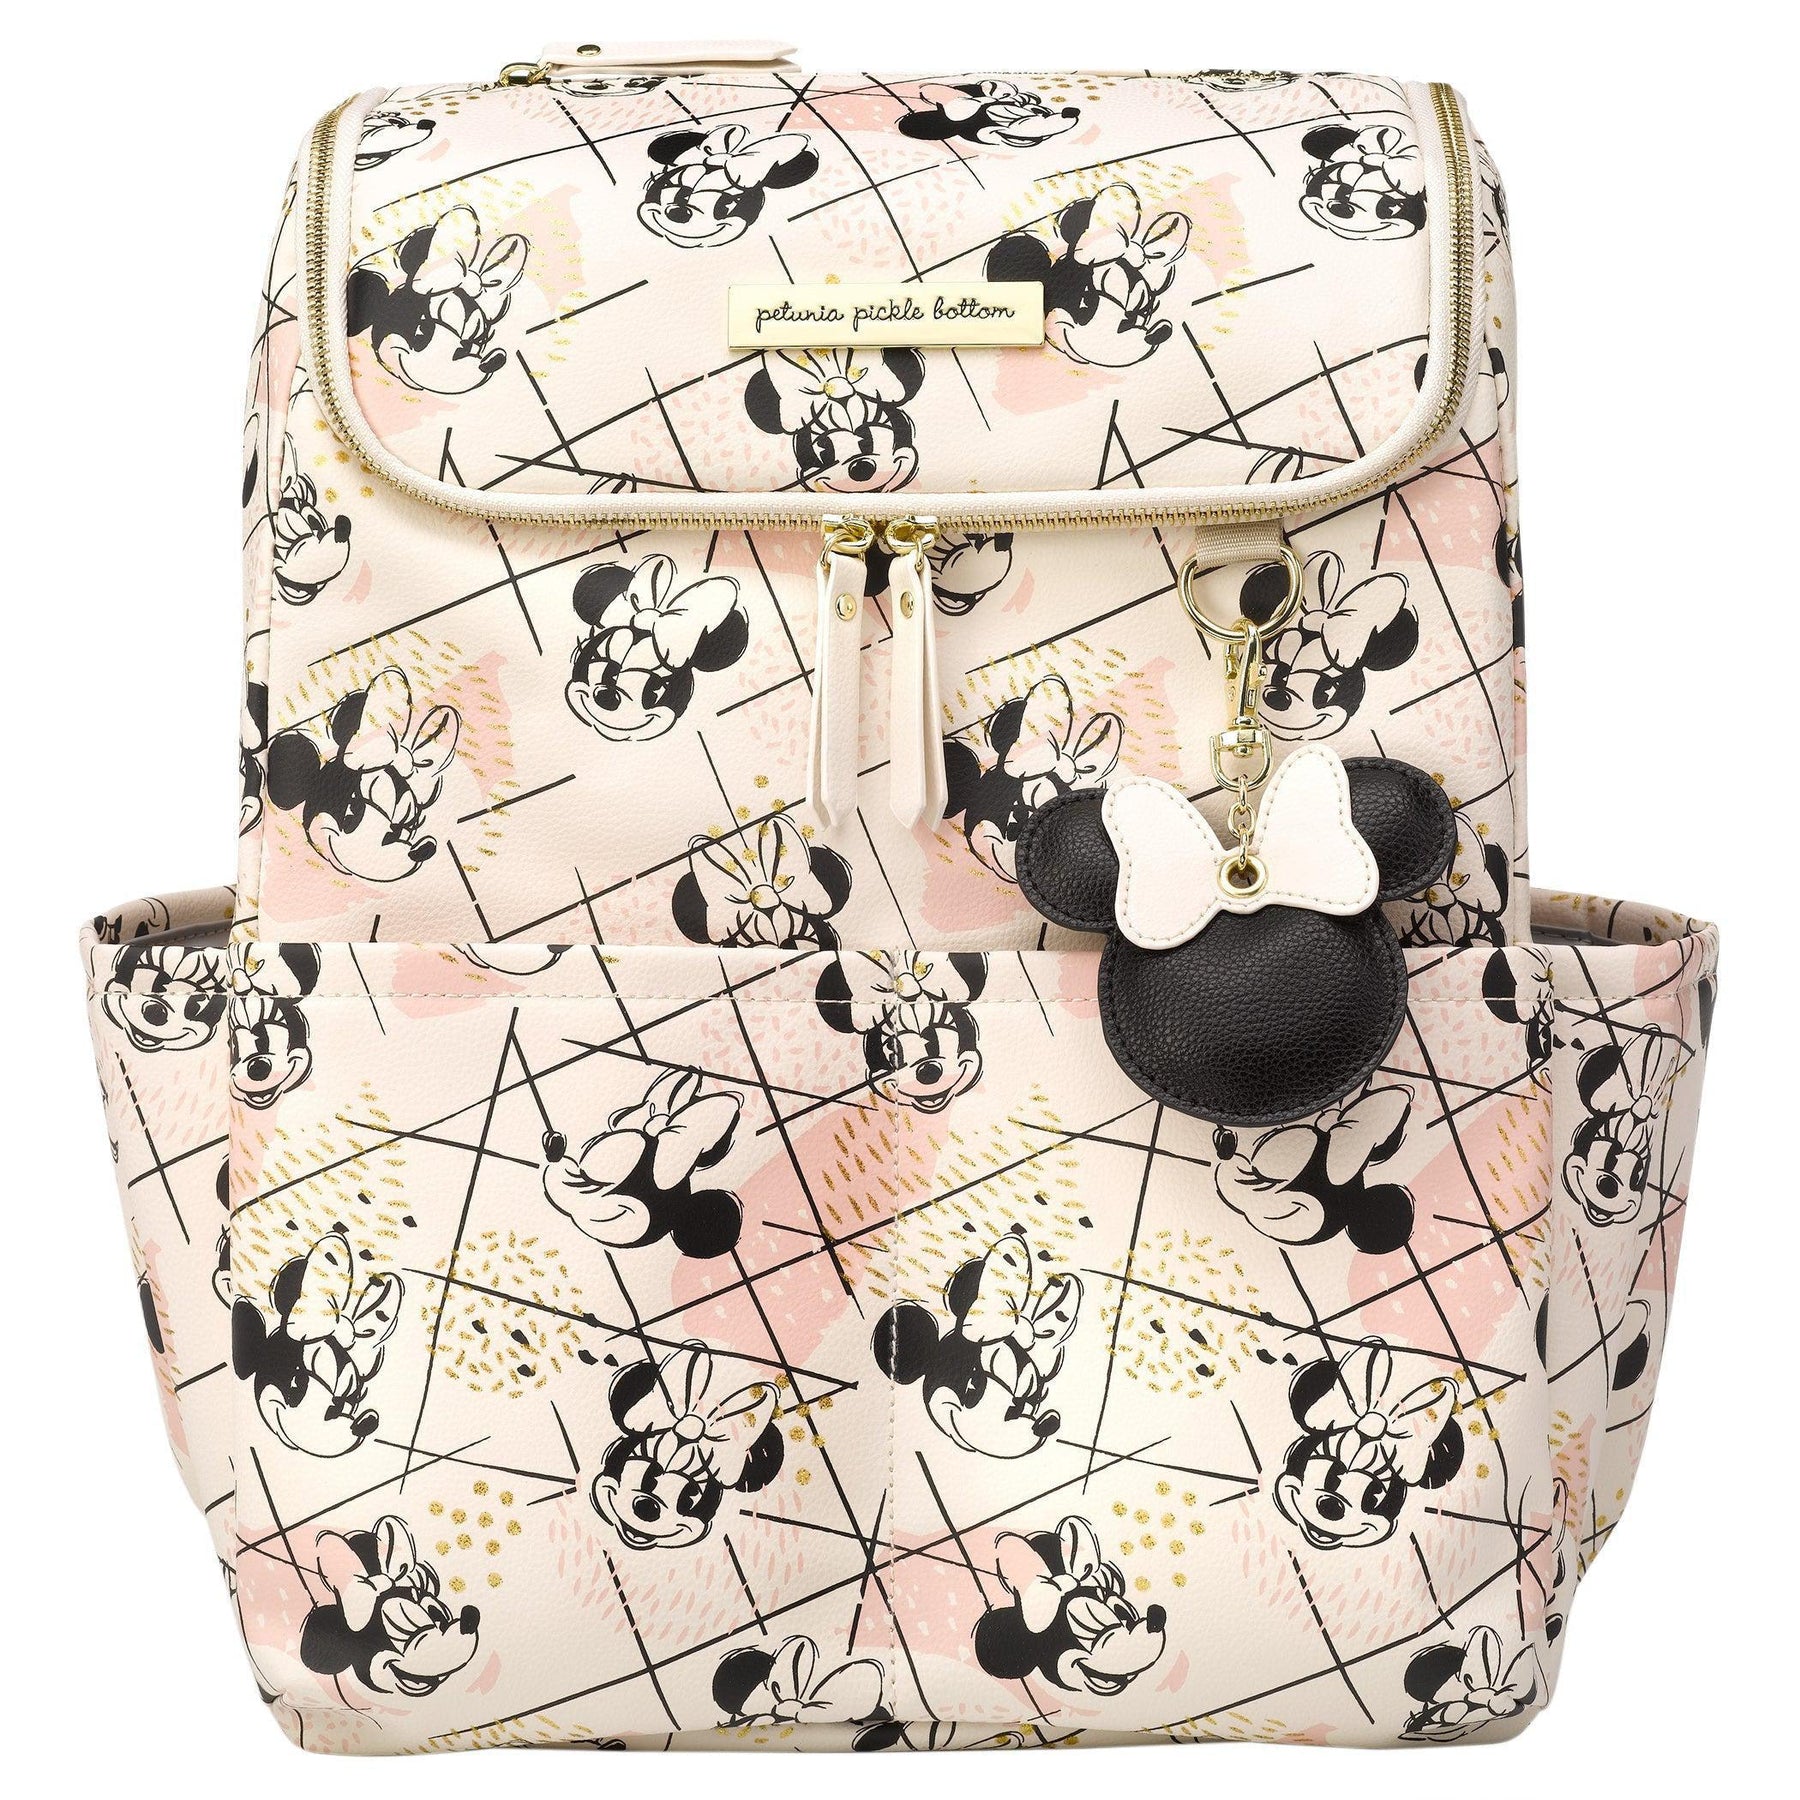 Petunia Pickle Bottom Method Backpack, Shimmery Minnie Mouse